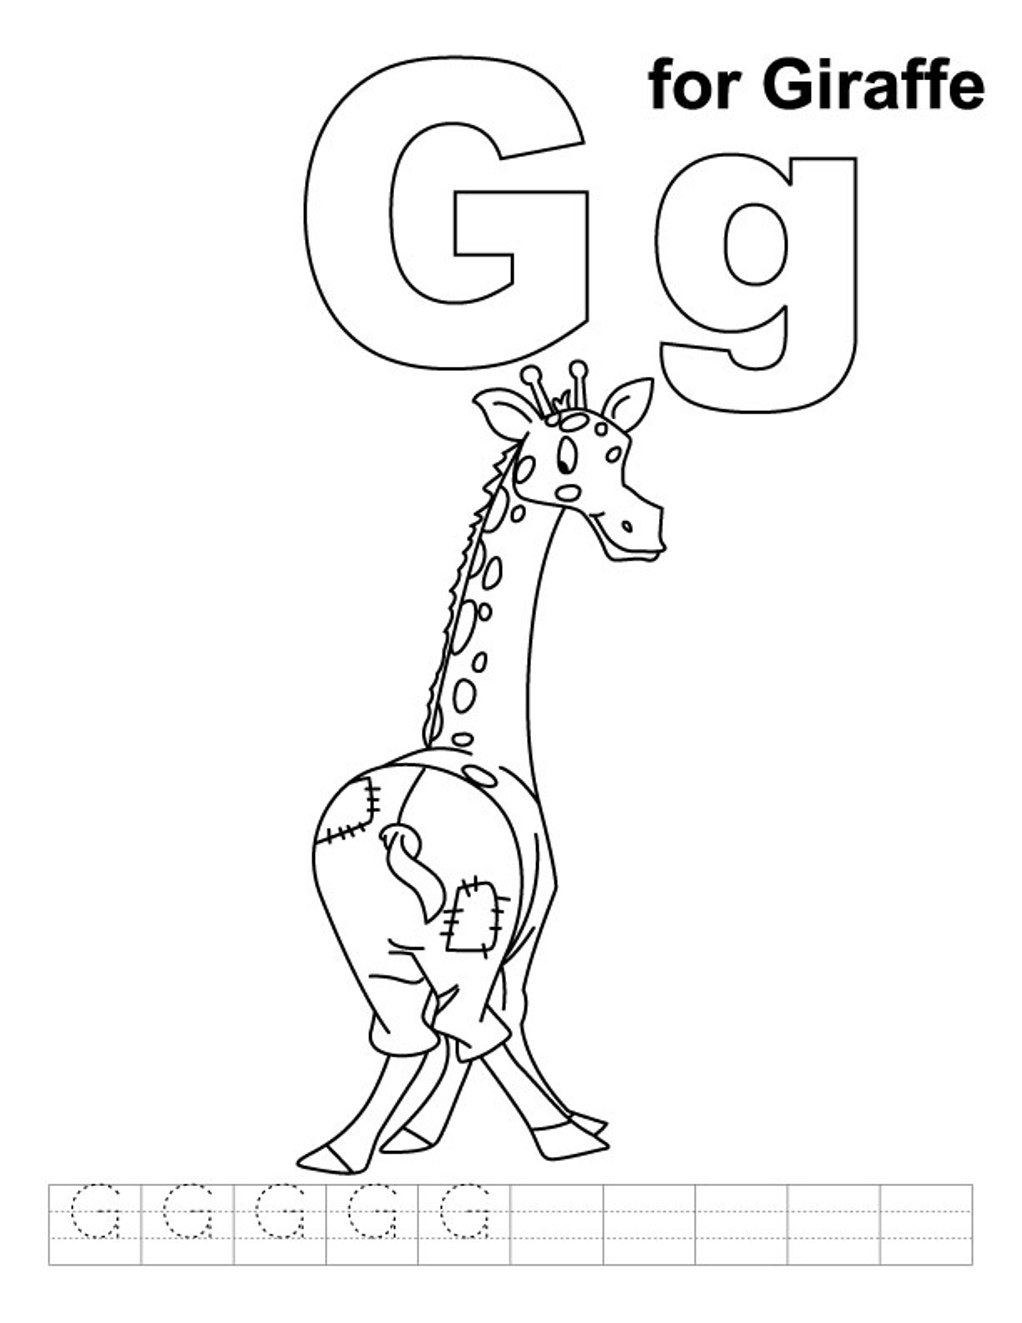 Coloring Pages Alphabet Animal Giraffe6ee8 Coloring Page